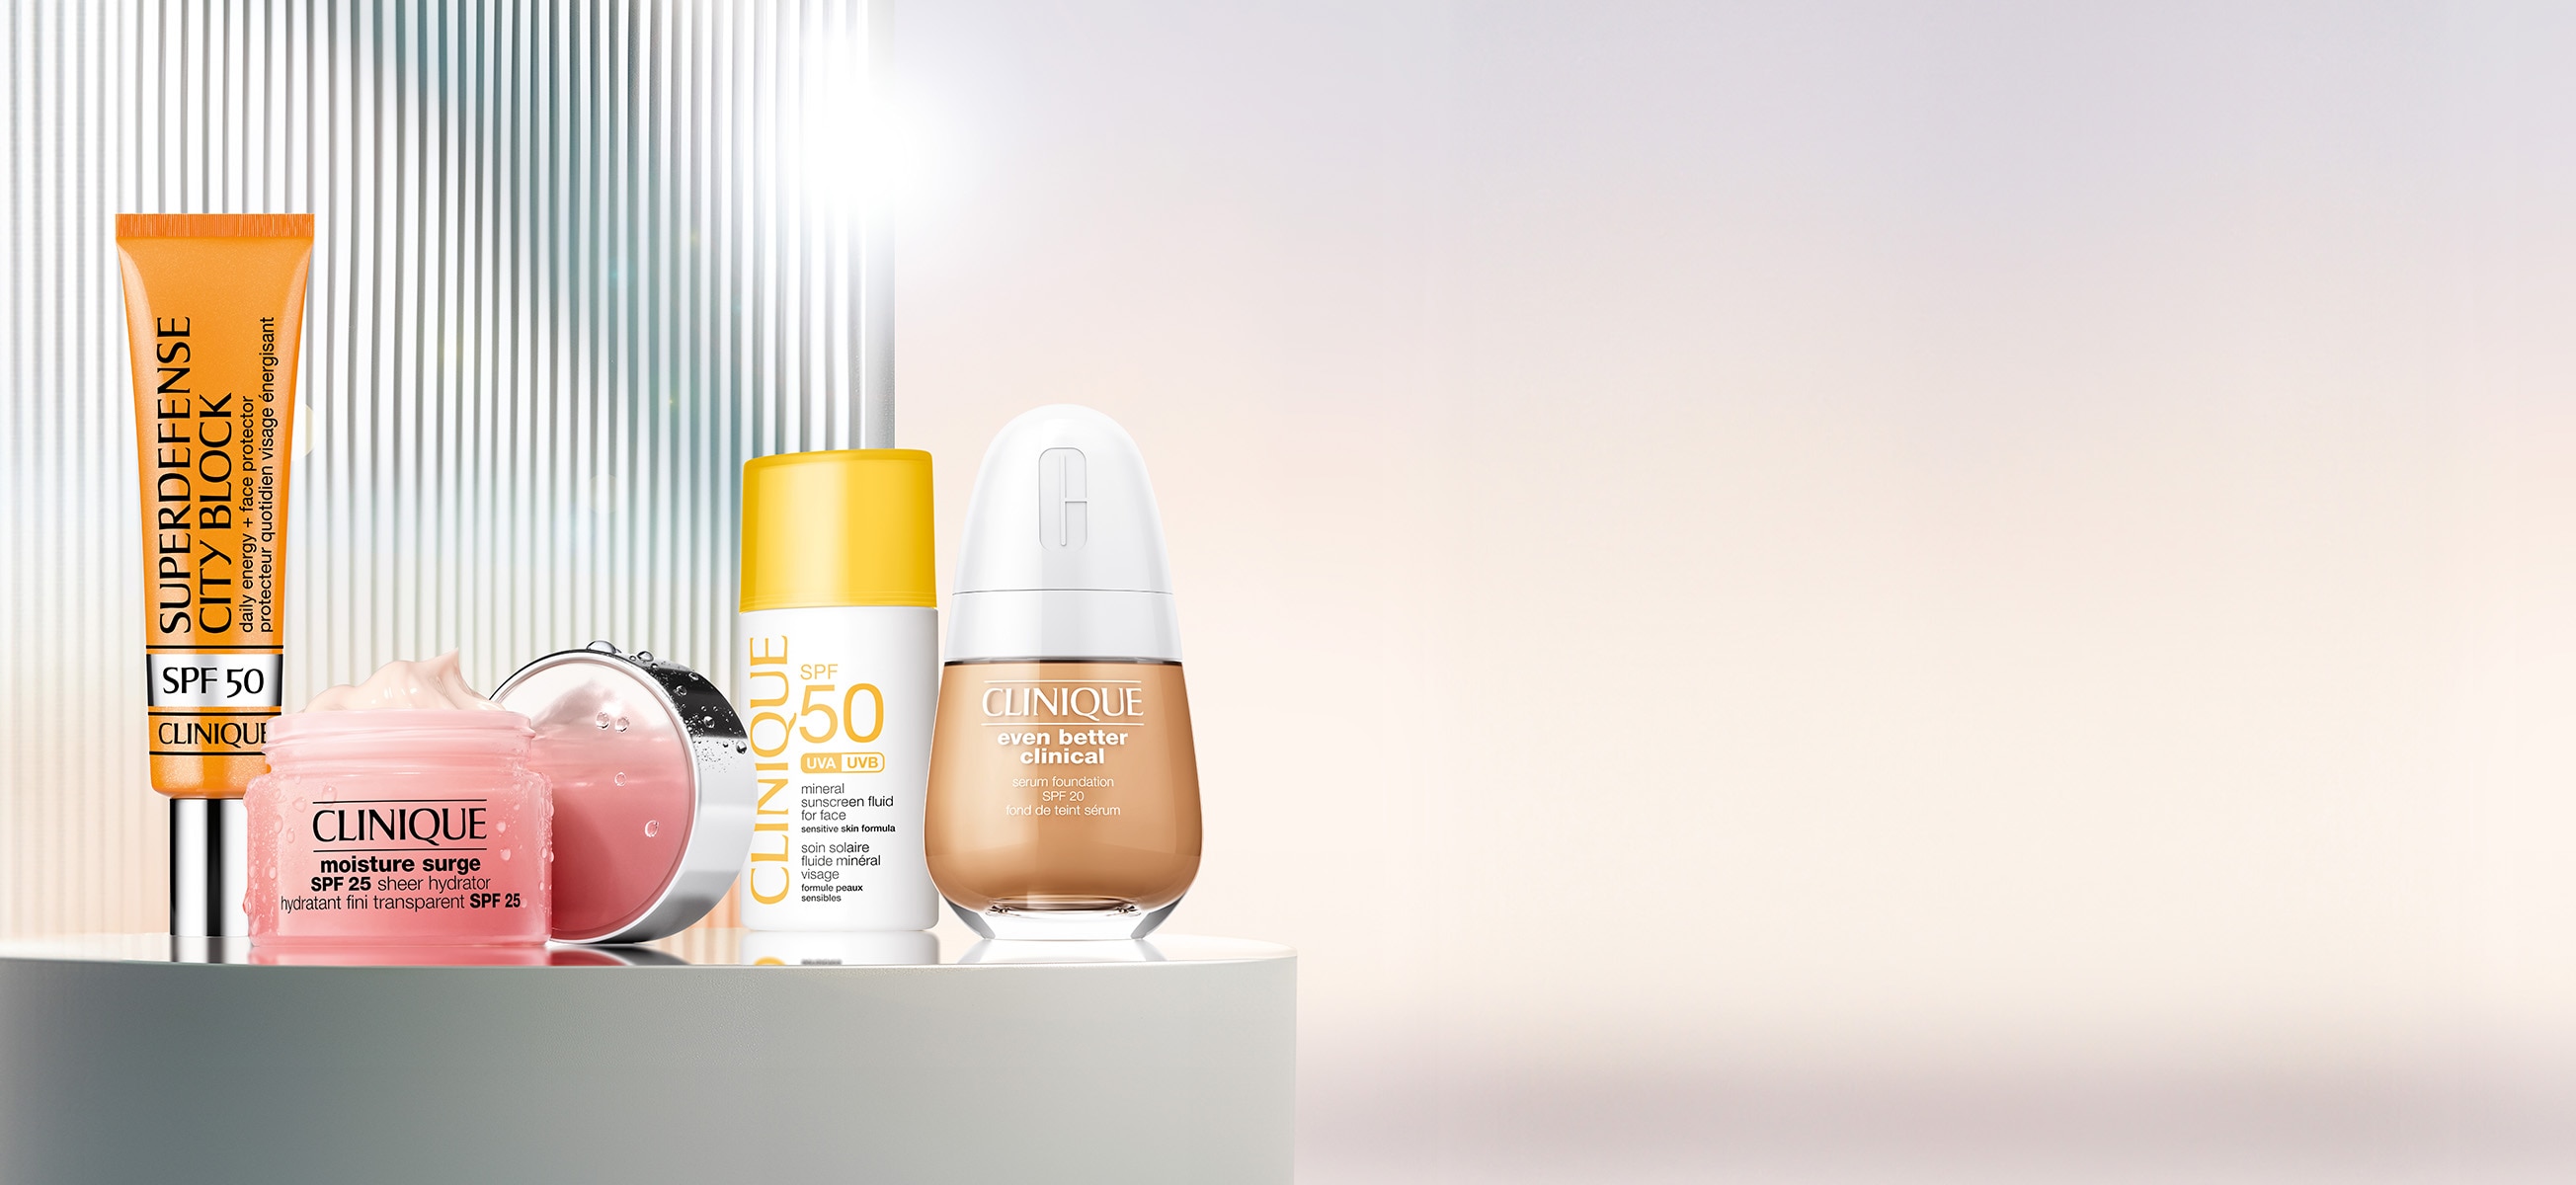 Selection of best selling Clinique SPF products on a grey plinth in front of a brightly lit, summery background